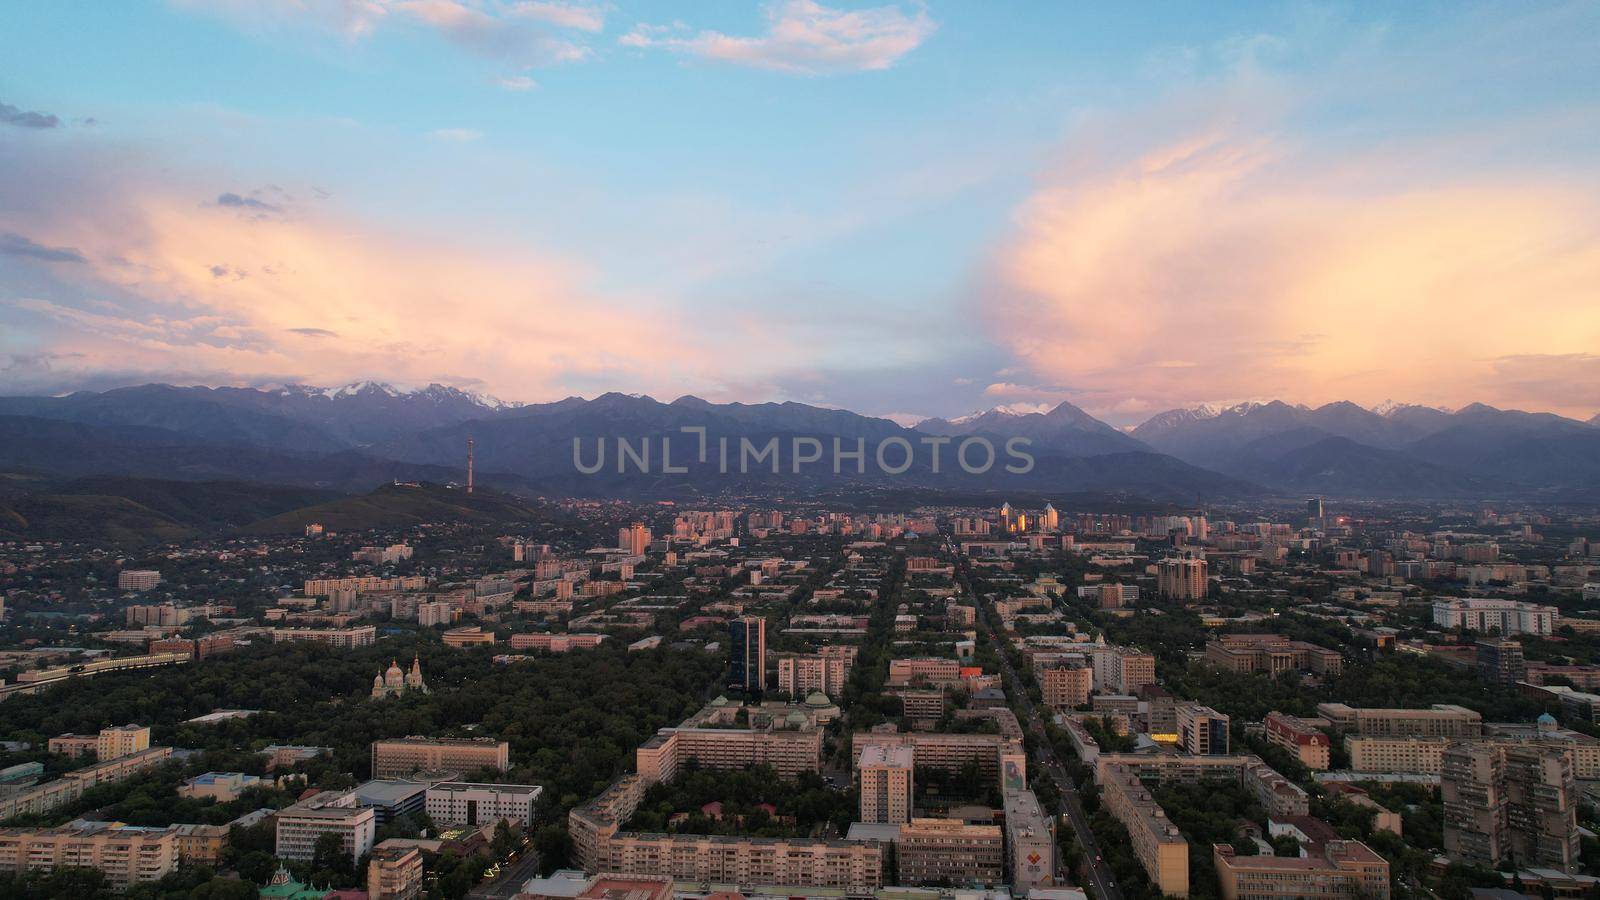 Epic sunset with clouds over the city of Almaty by Passcal